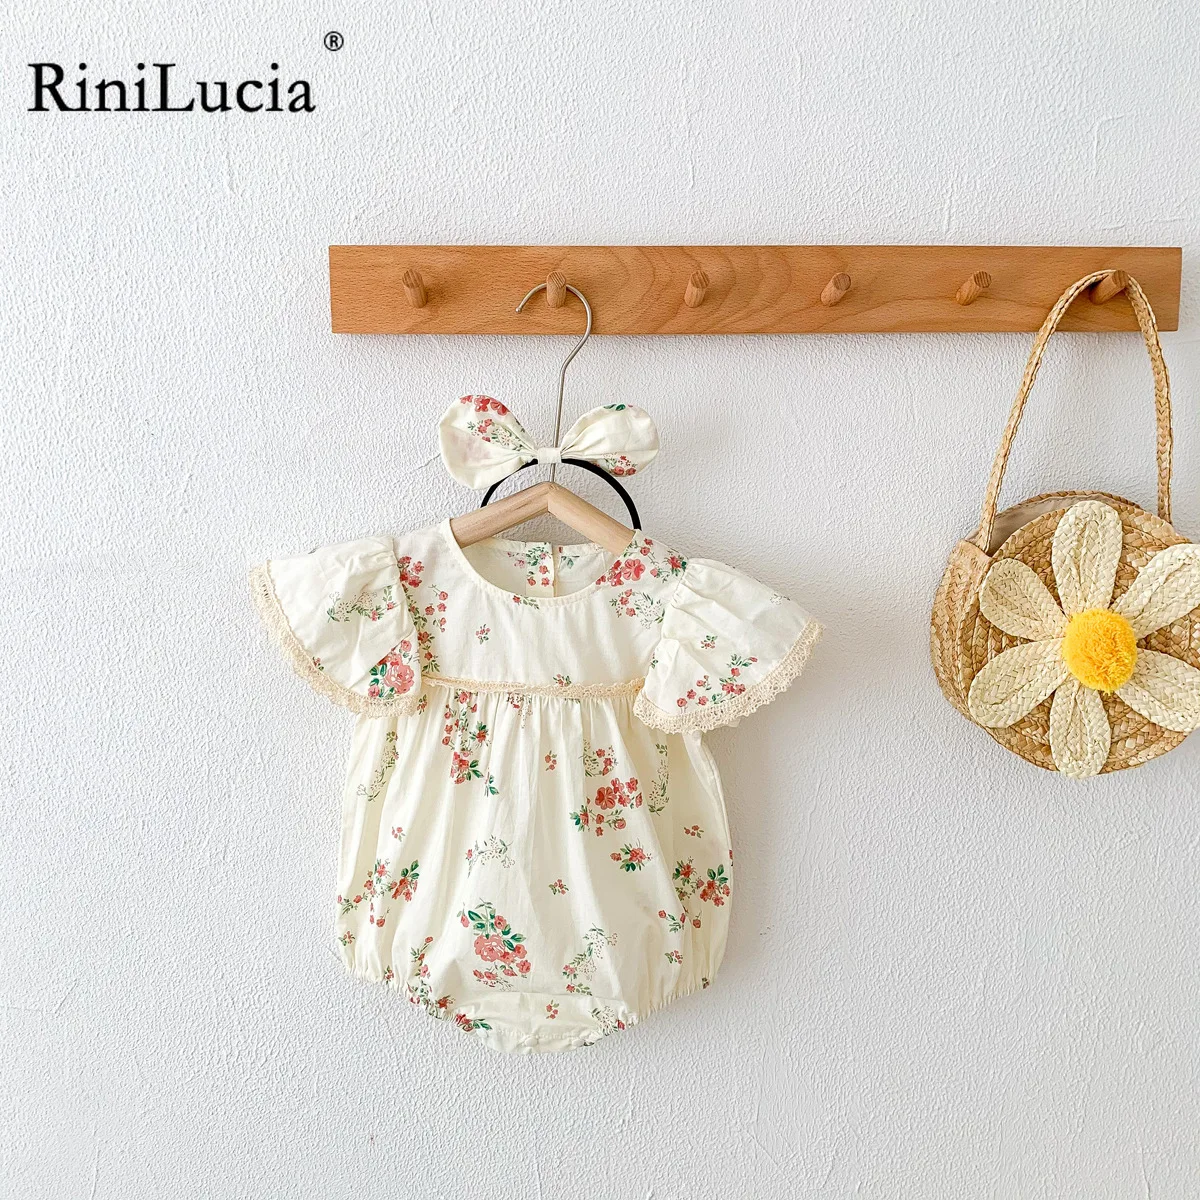 

RiniLucia Lace Princess Toddler Romper 2022 Summer Floral Fly Sleeve O-neck Newborn Baby Girl Clothes Cotton Infant Outfits